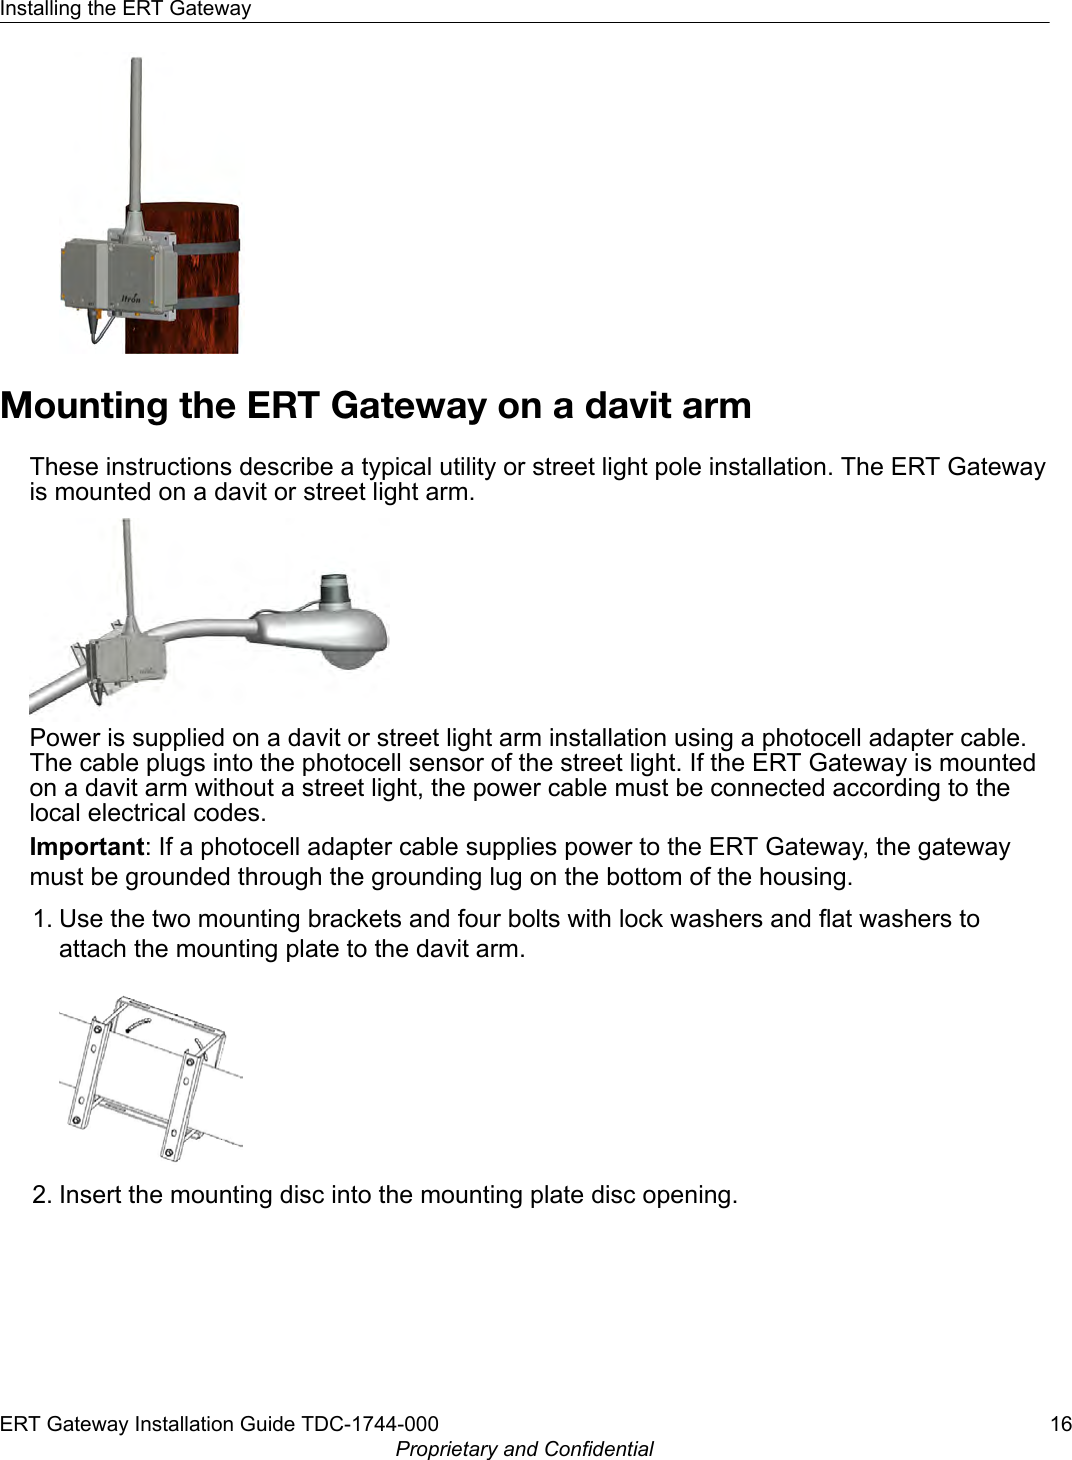 Mounting the ERT Gateway on a davit armThese instructions describe a typical utility or street light pole installation. The ERT Gatewayis mounted on a davit or street light arm.Power is supplied on a davit or street light arm installation using a photocell adapter cable.The cable plugs into the photocell sensor of the street light. If the ERT Gateway is mountedon a davit arm without a street light, the power cable must be connected according to thelocal electrical codes.Important: If a photocell adapter cable supplies power to the ERT Gateway, the gatewaymust be grounded through the grounding lug on the bottom of the housing.1. Use the two mounting brackets and four bolts with lock washers and flat washers toattach the mounting plate to the davit arm.2. Insert the mounting disc into the mounting plate disc opening.Installing the ERT GatewayERT Gateway Installation Guide TDC-1744-000 16Proprietary and Confidential